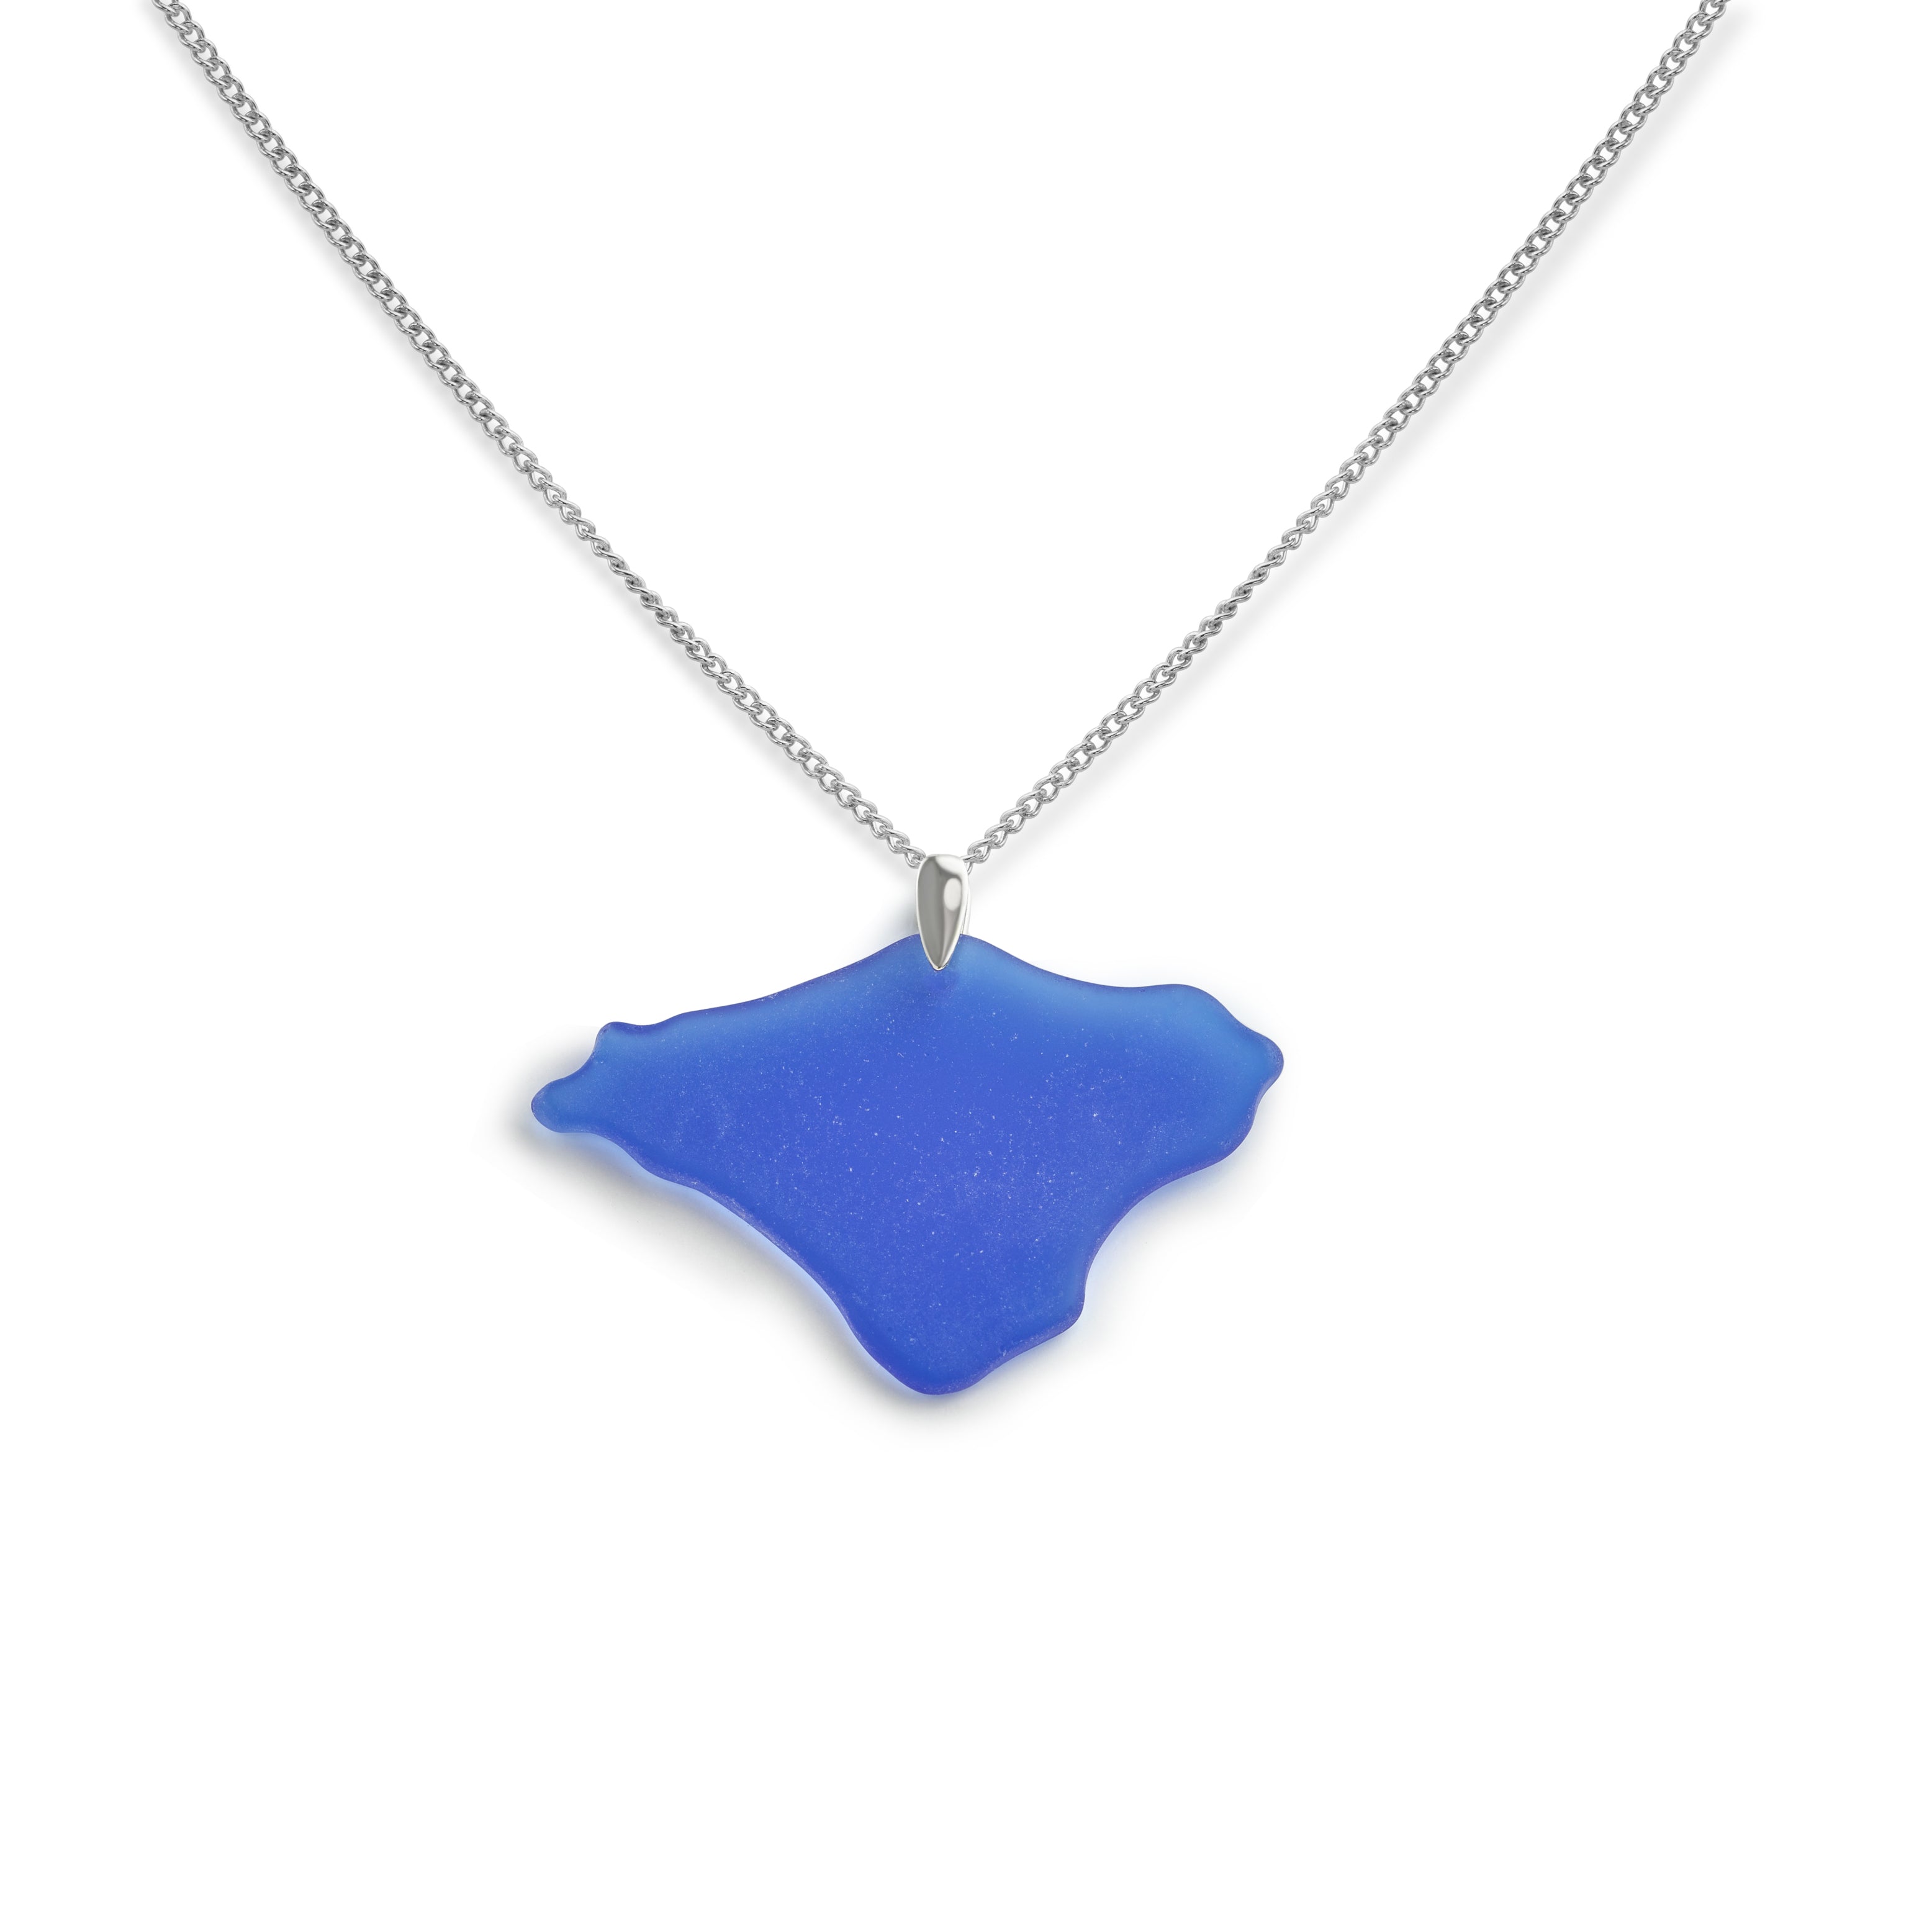  Isle of Wight Necklace in Blue Seaglass